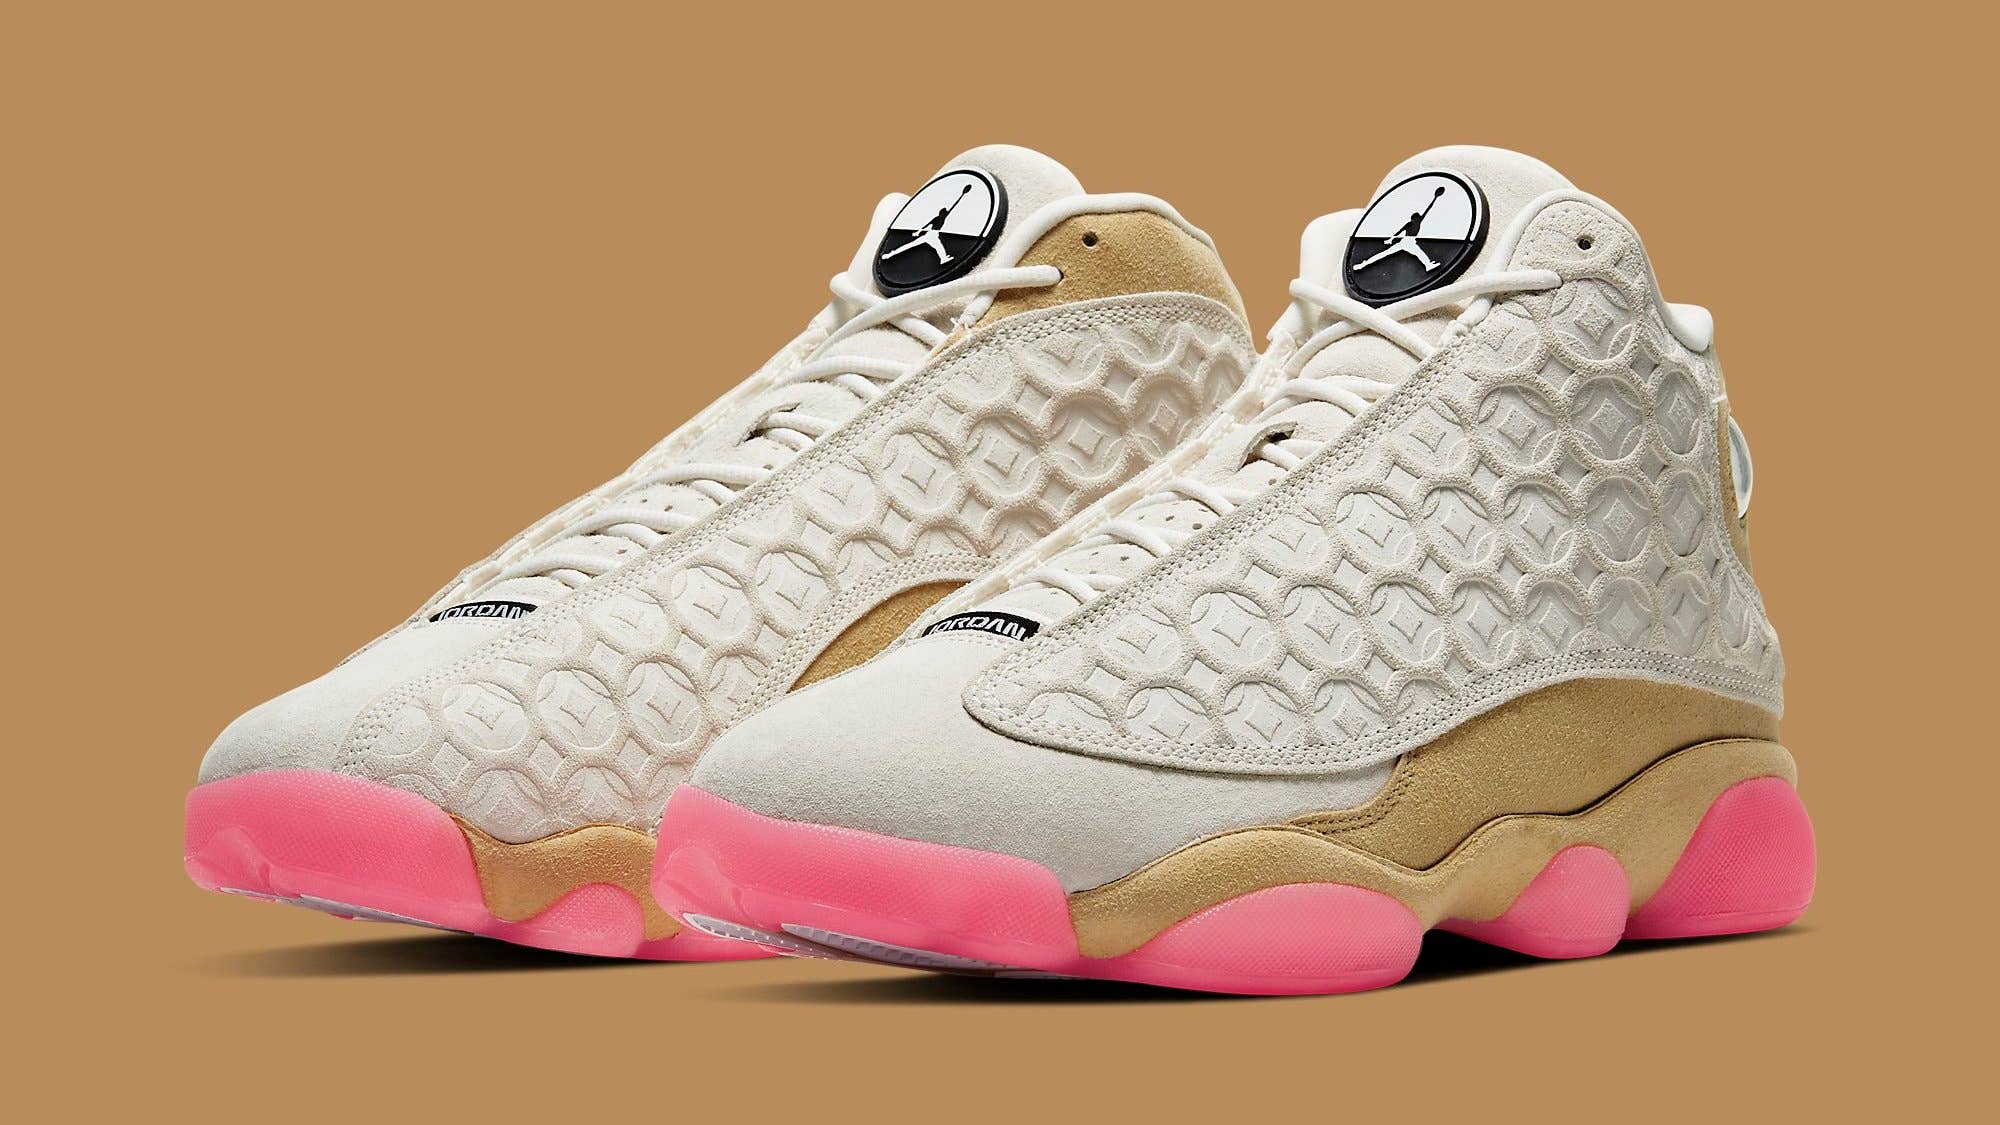 New Air Jordan 13 Is Releasing to Celebrate 2020's Chinese New Year